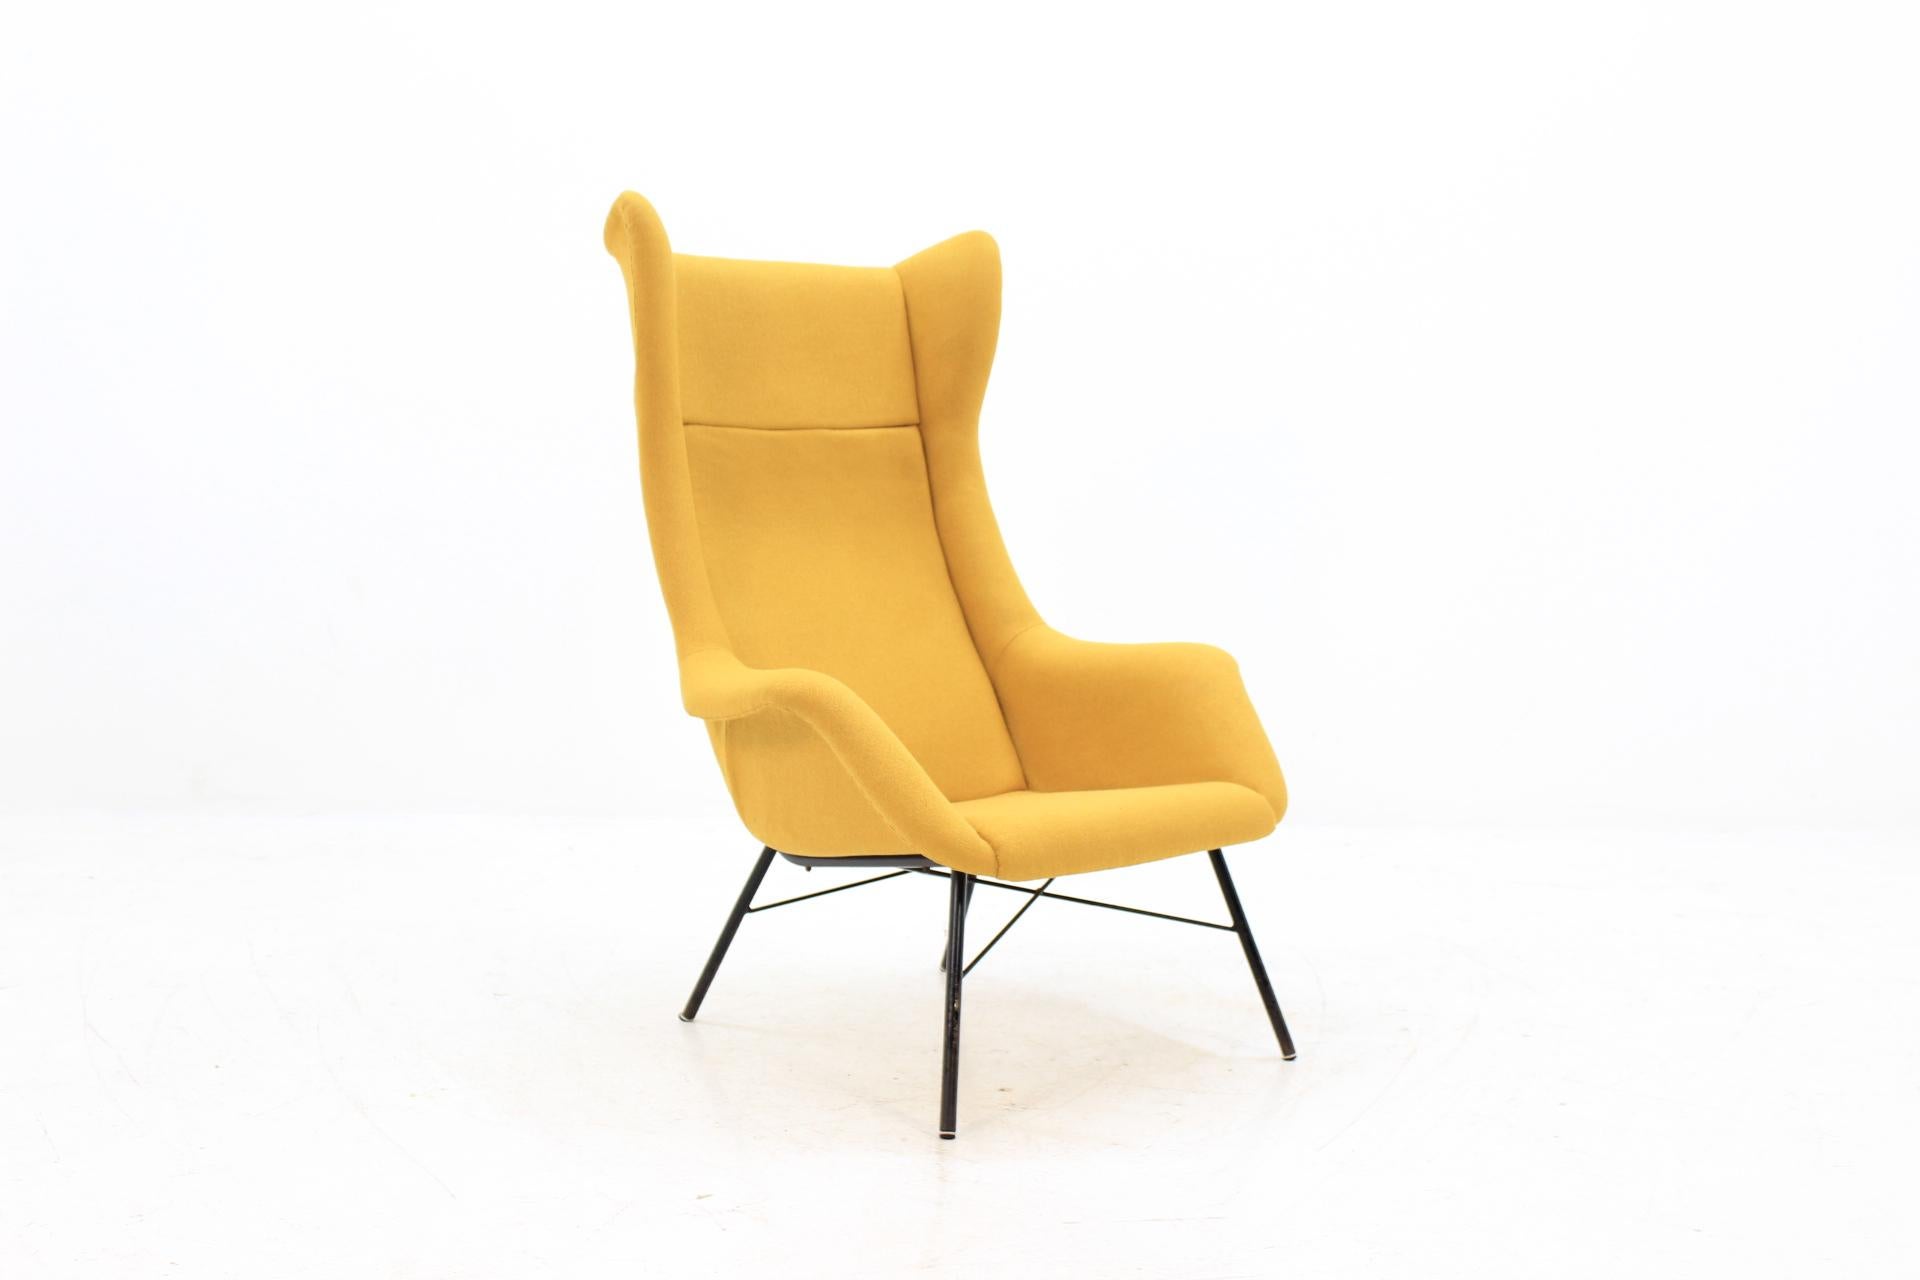 Wingback armchair designed by Miroslav Navratil
Produced by Ton in Bystrice in the 1960s
Constructed from plastic laminate with an iron frame. Newly upholstered.